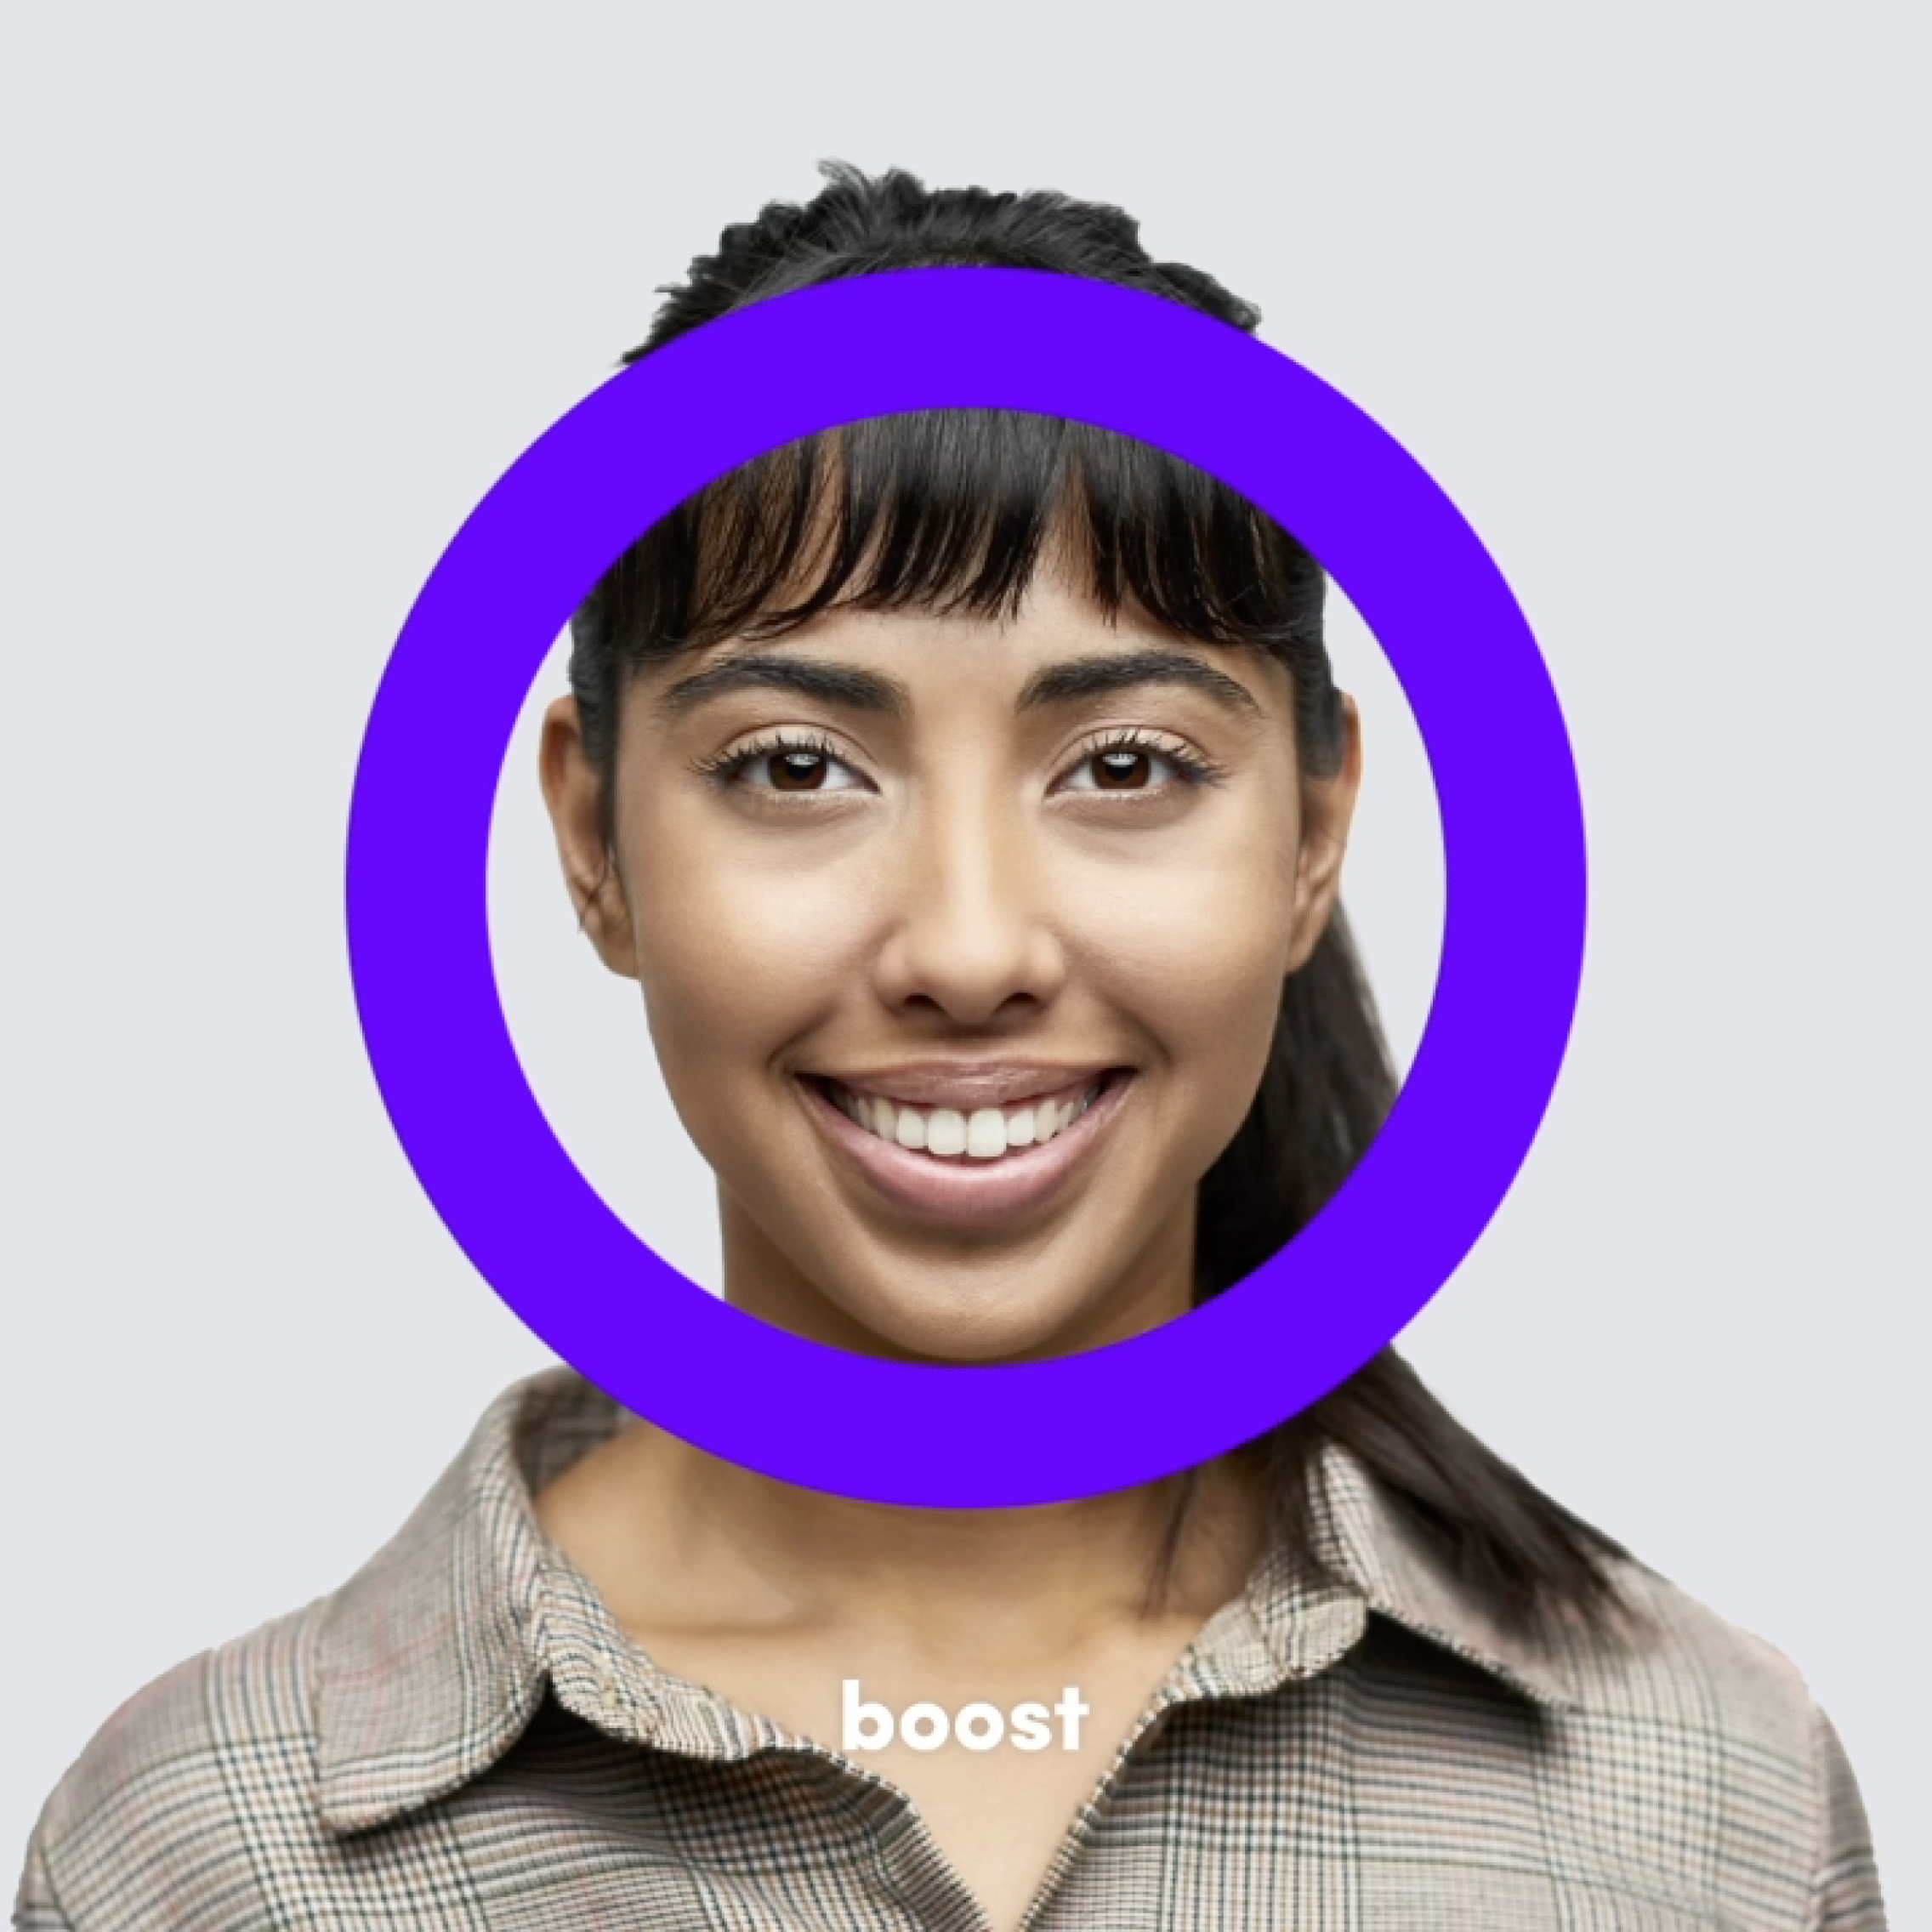 Smiling woman with bangs and beige blouse with purple circle in front of her face - Boost